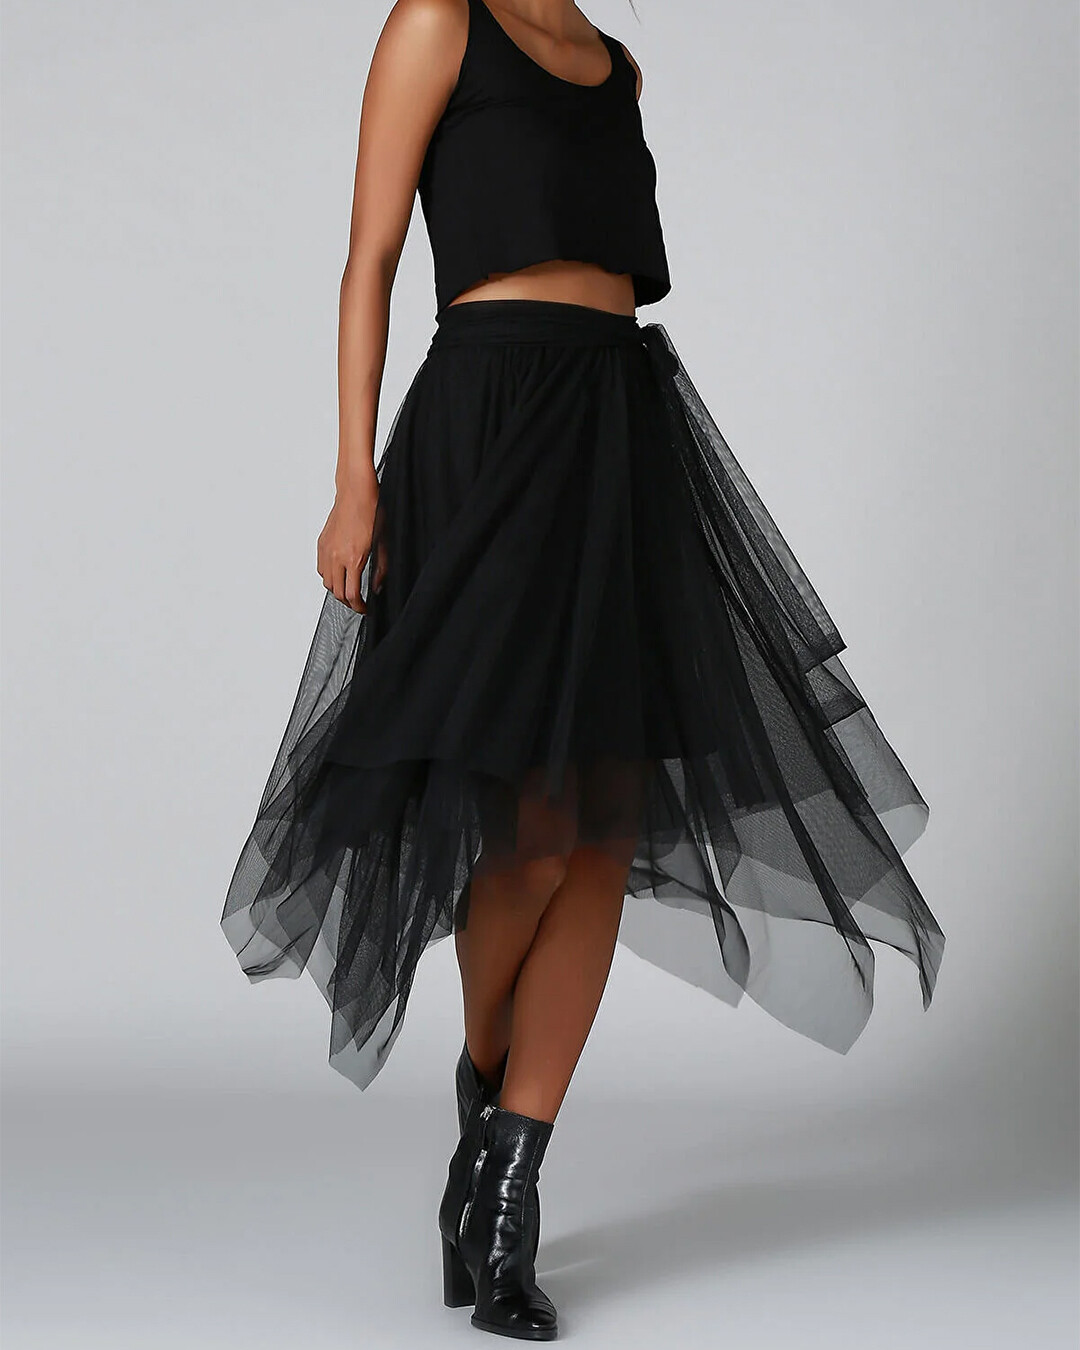 Tulle Asymmetrical Skirt with 2 Layers Lined